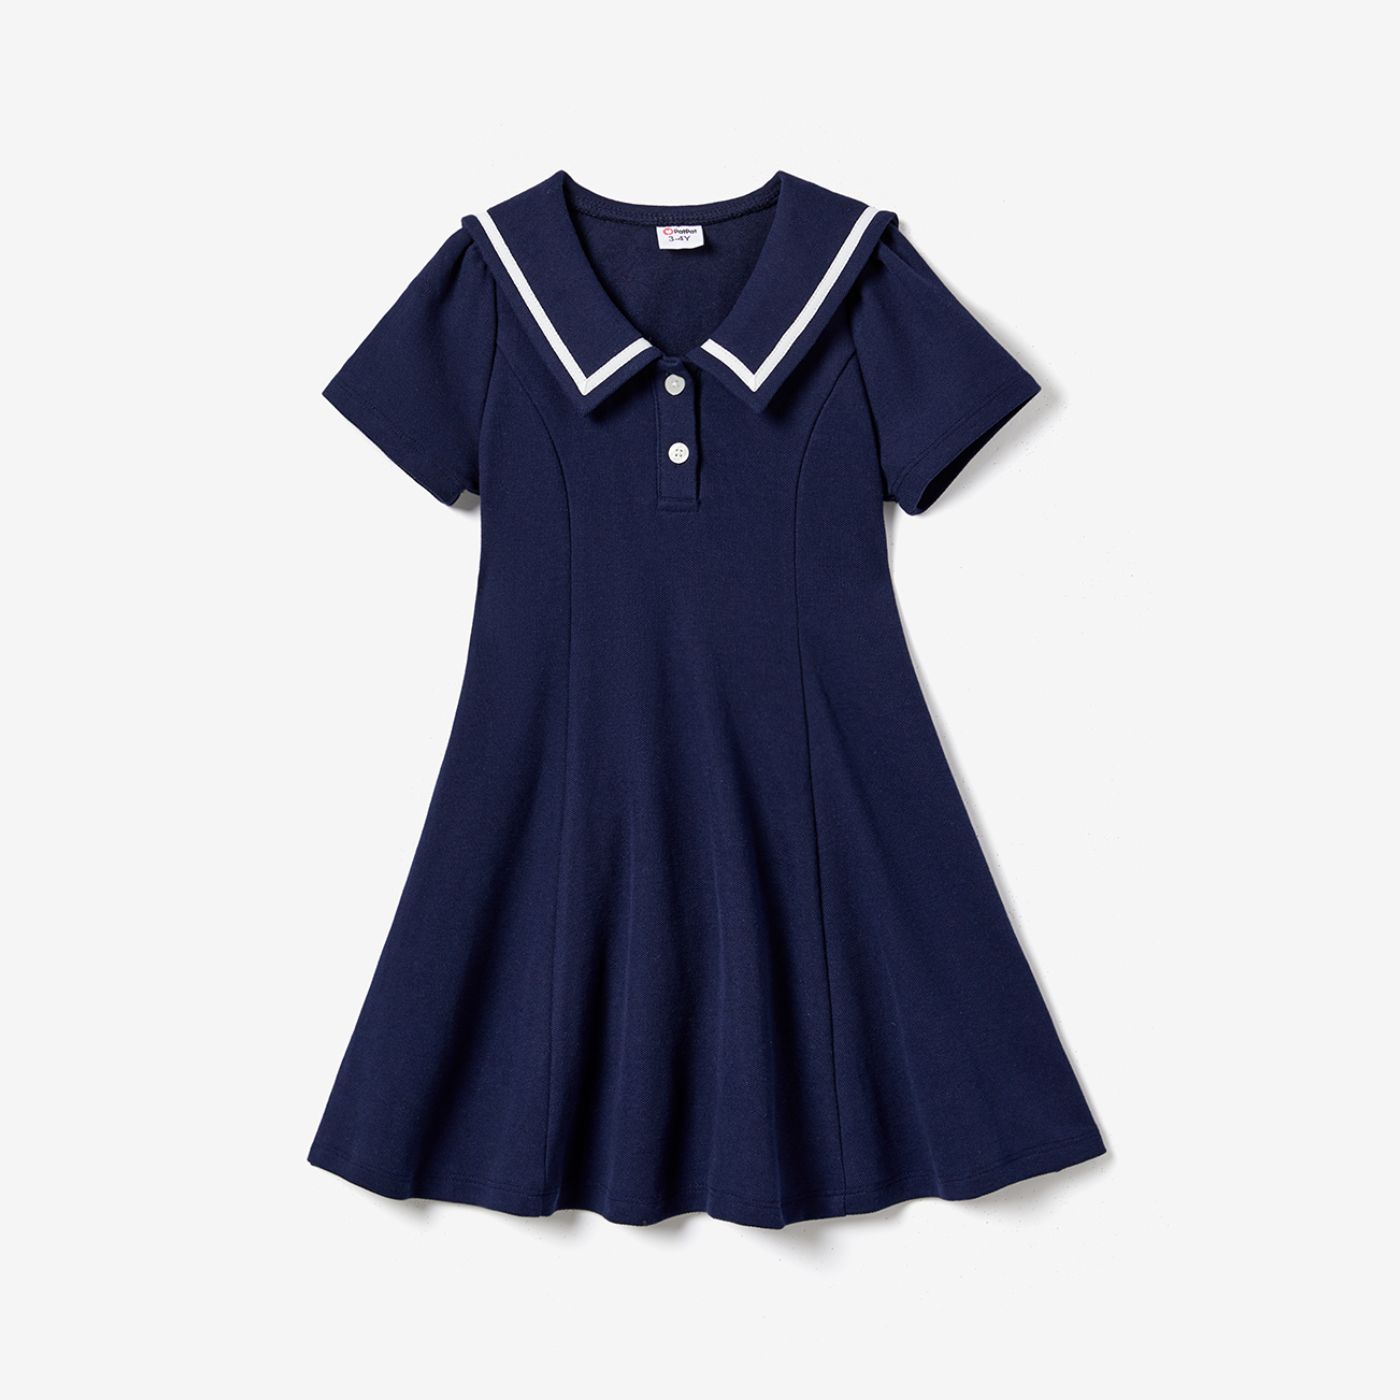 Famille Assortie Casual Bleu Marine À Manches Courtes Rayures Polos Chemises Et Col Marin Solide Smocked Ourlet Robes Ensembles